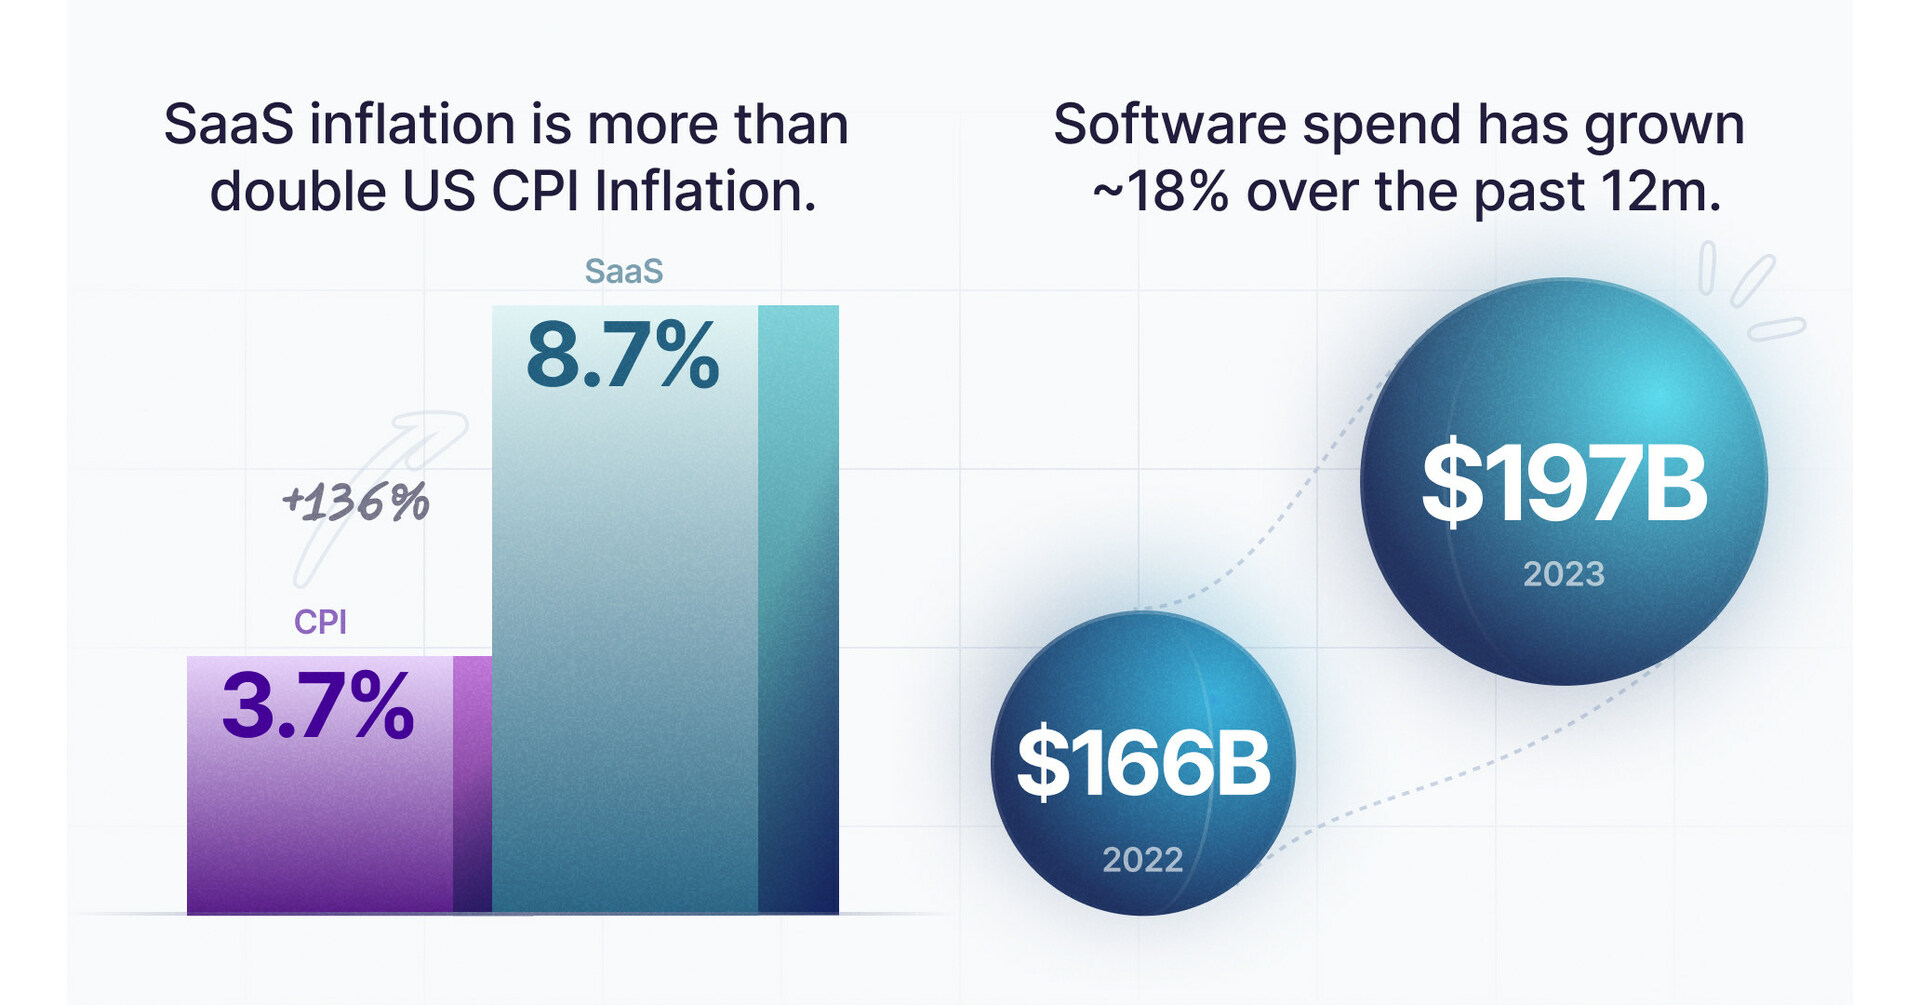 Cost of software crisis: SaaS inflation running at more than double US  consumer inflation